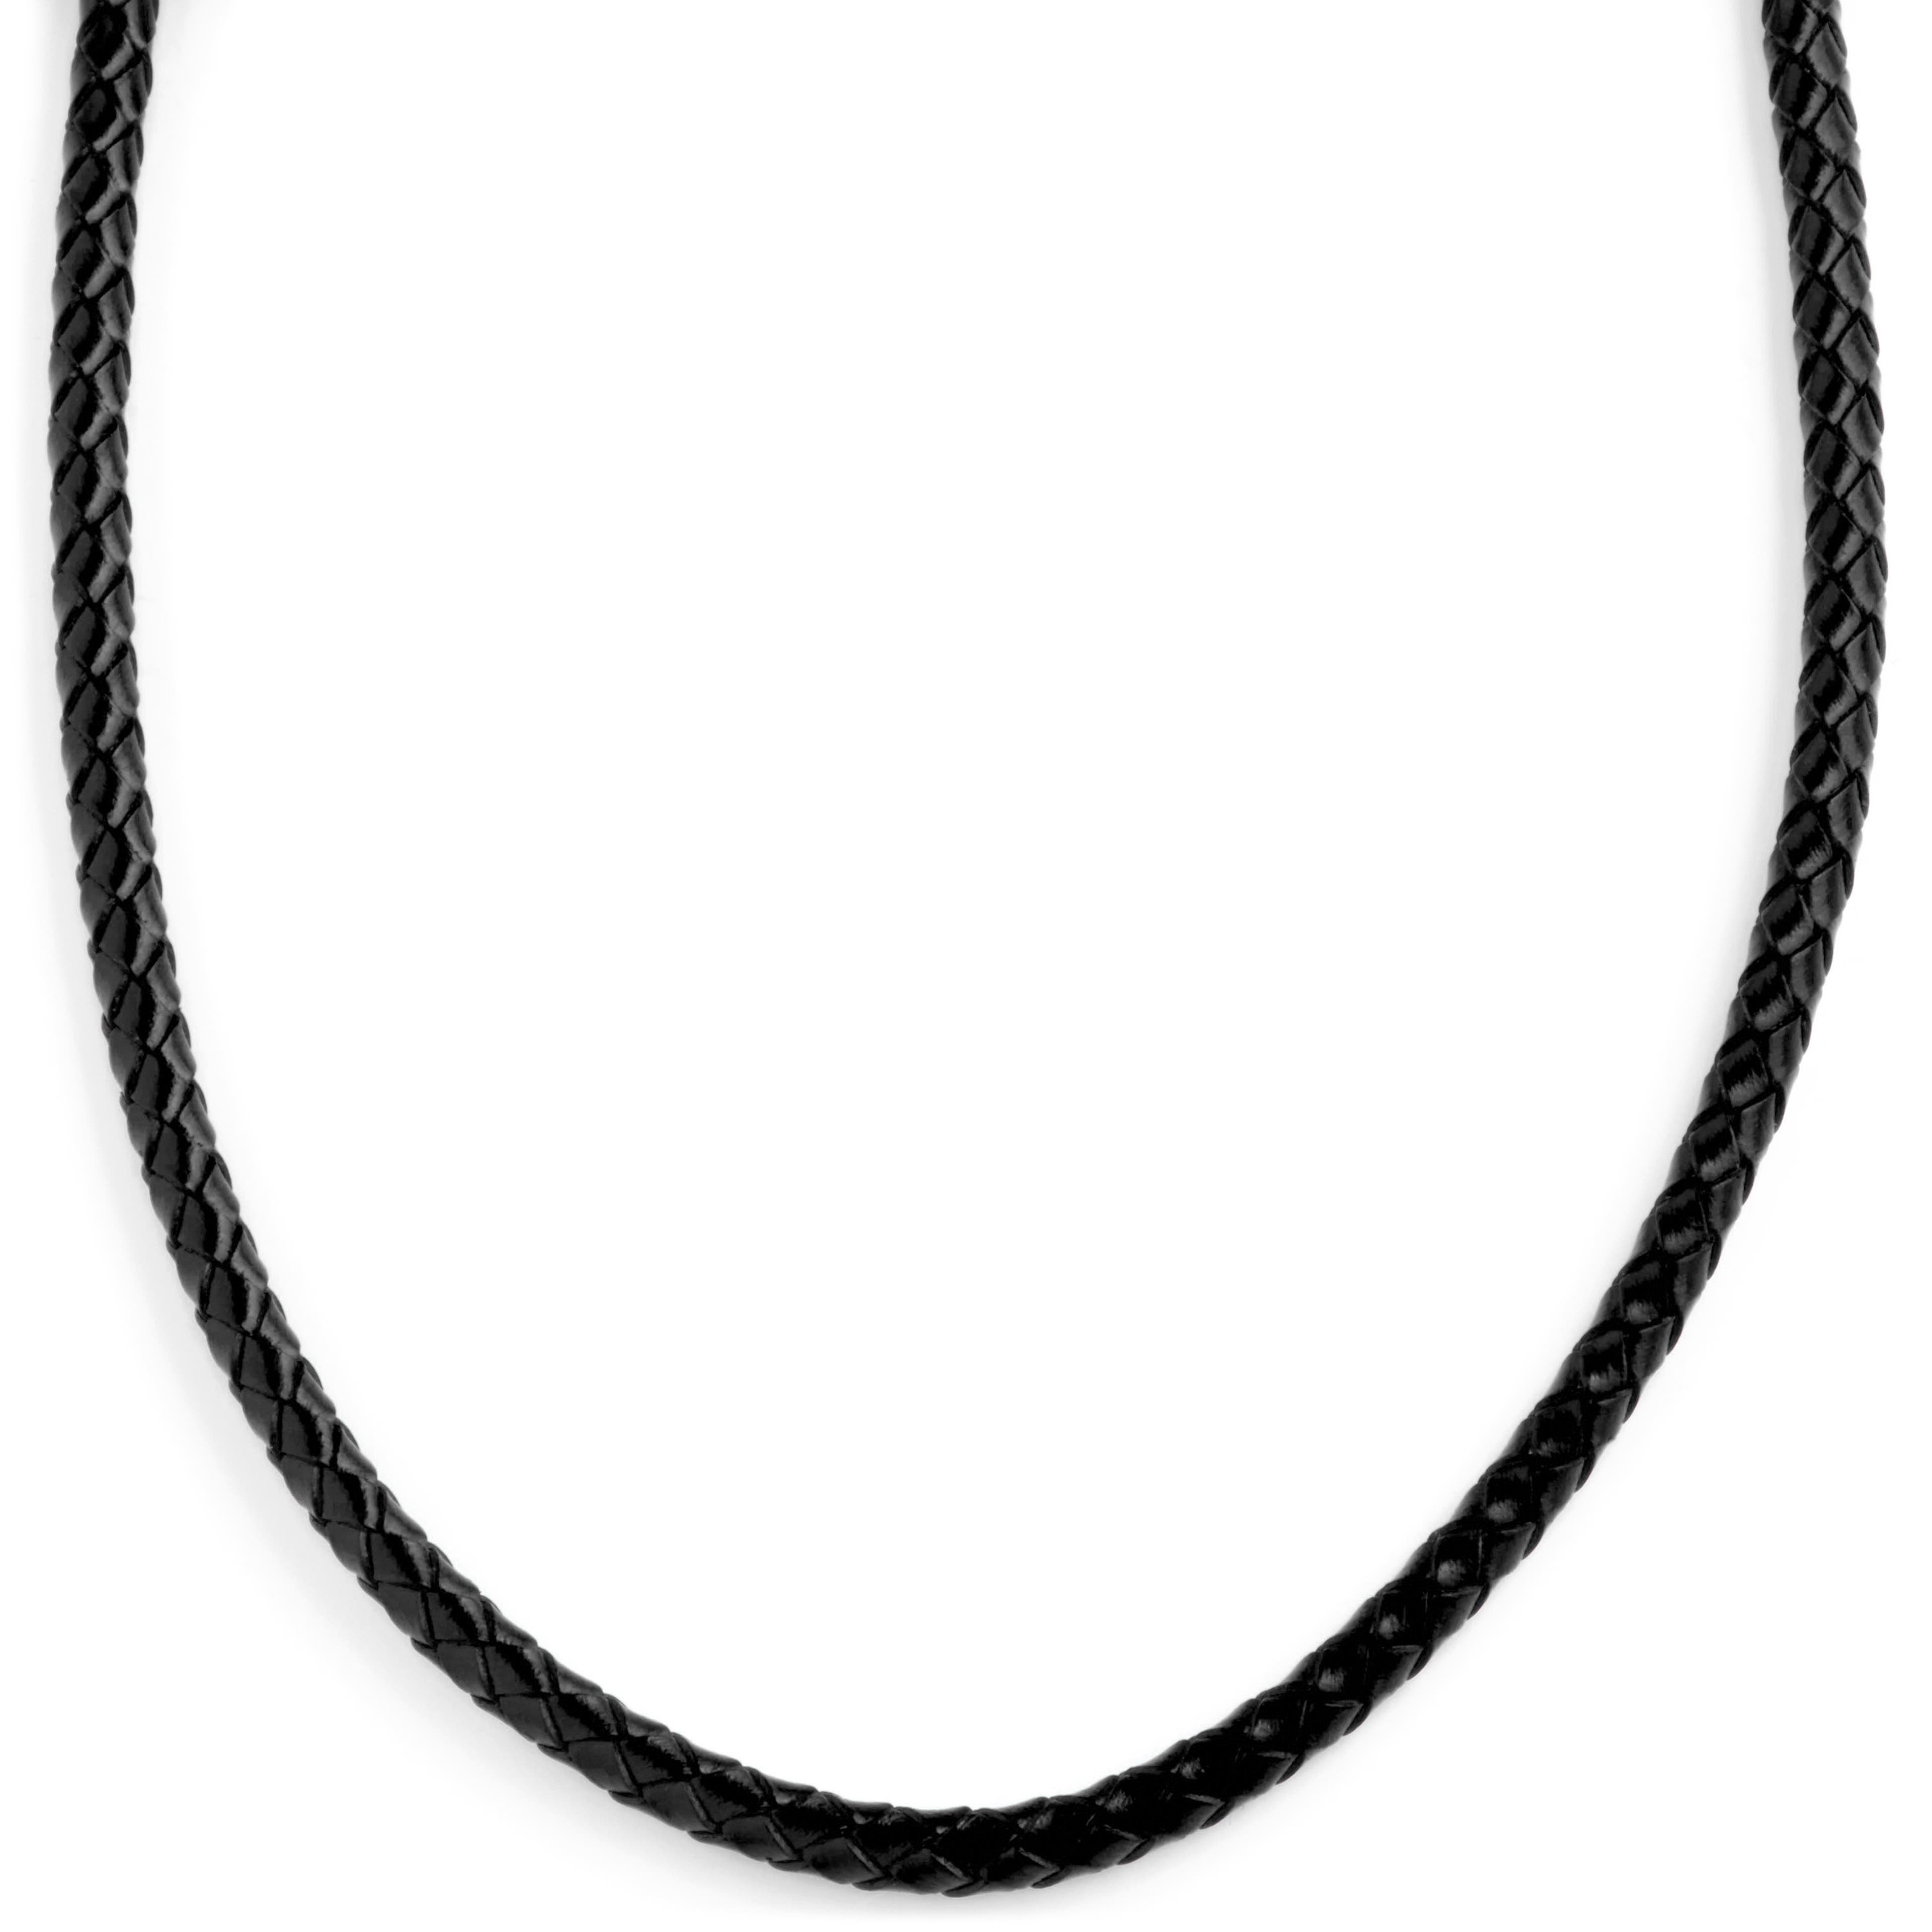 5 mm Black Leather Woven Necklace